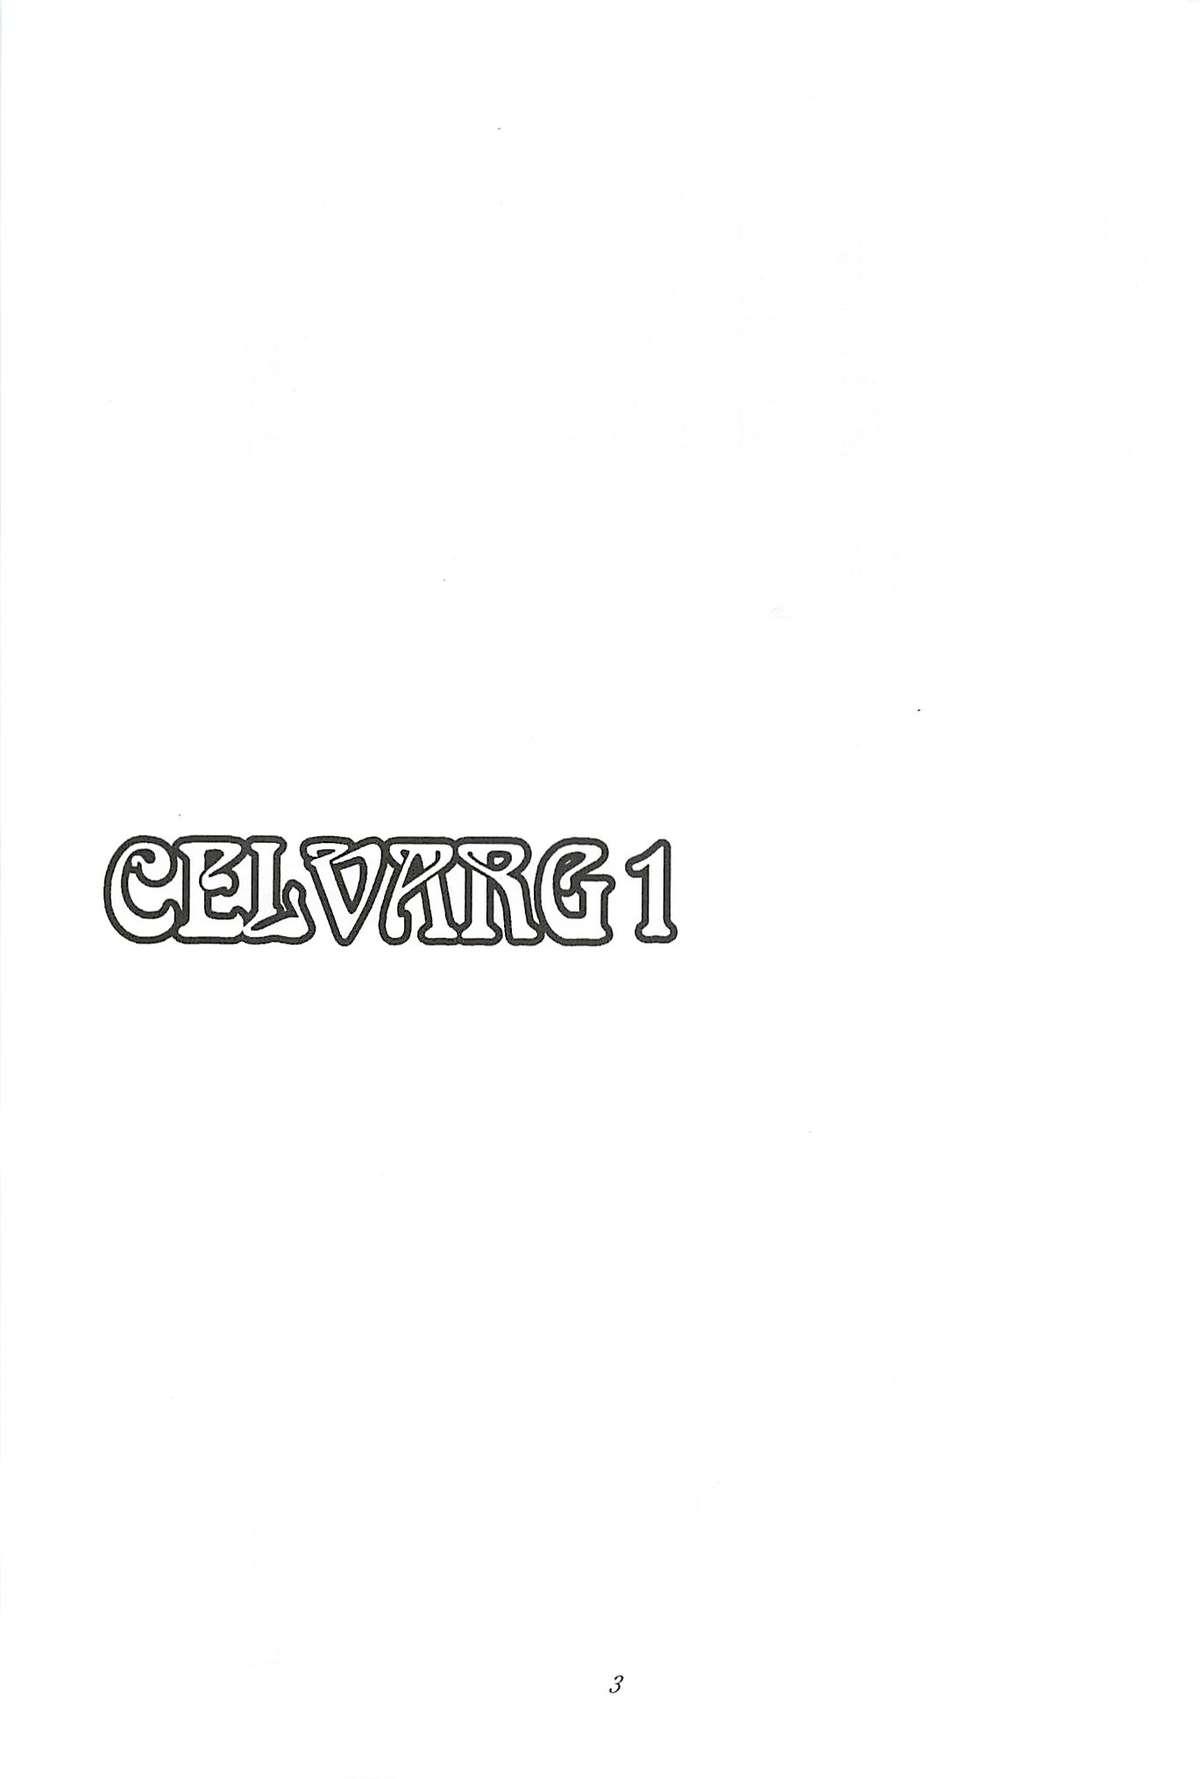 Young CELVARG1 Punish - Page 2